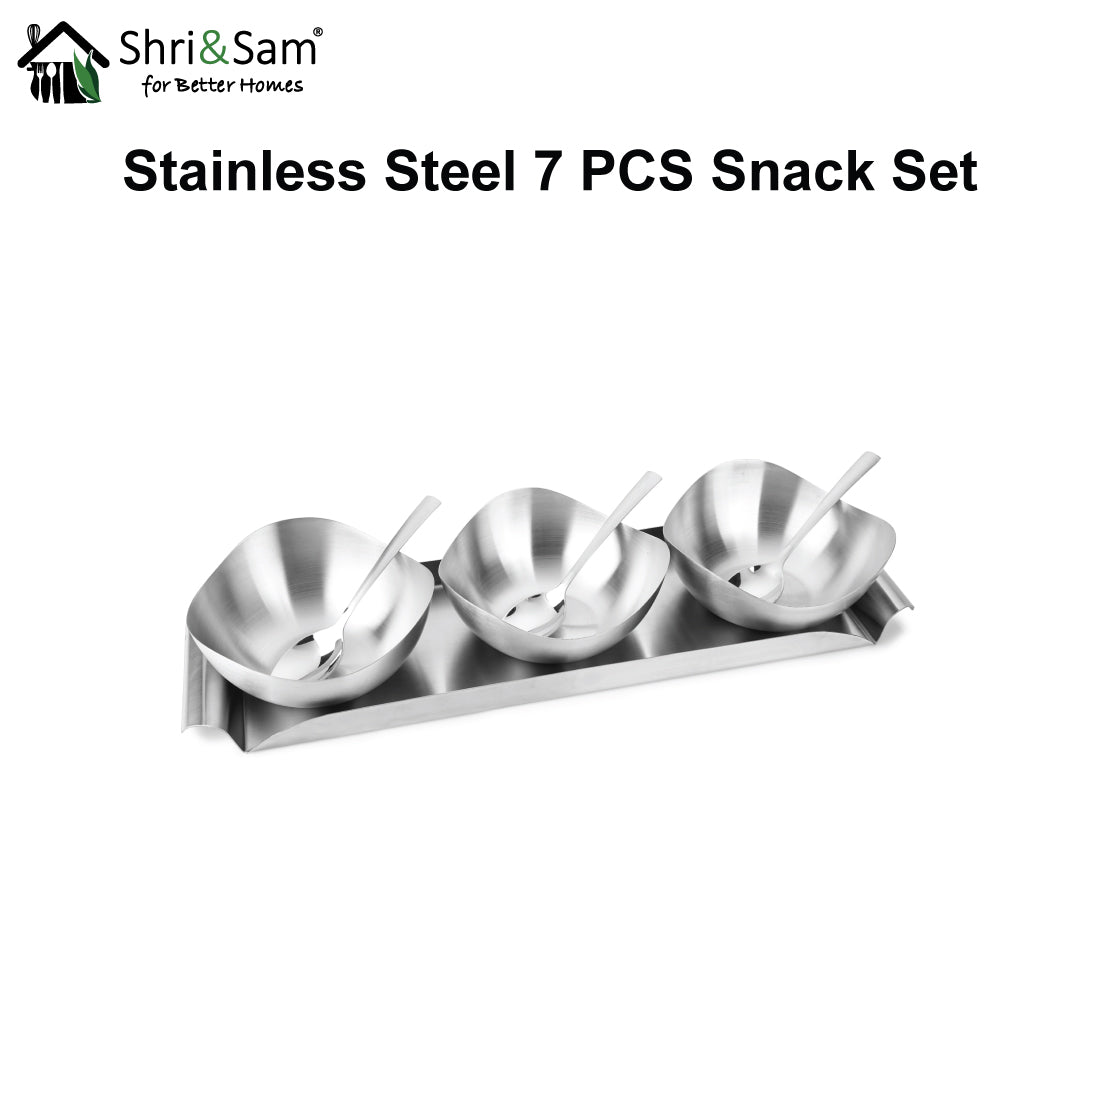 Stainless Steel 7 PCS Snack Set